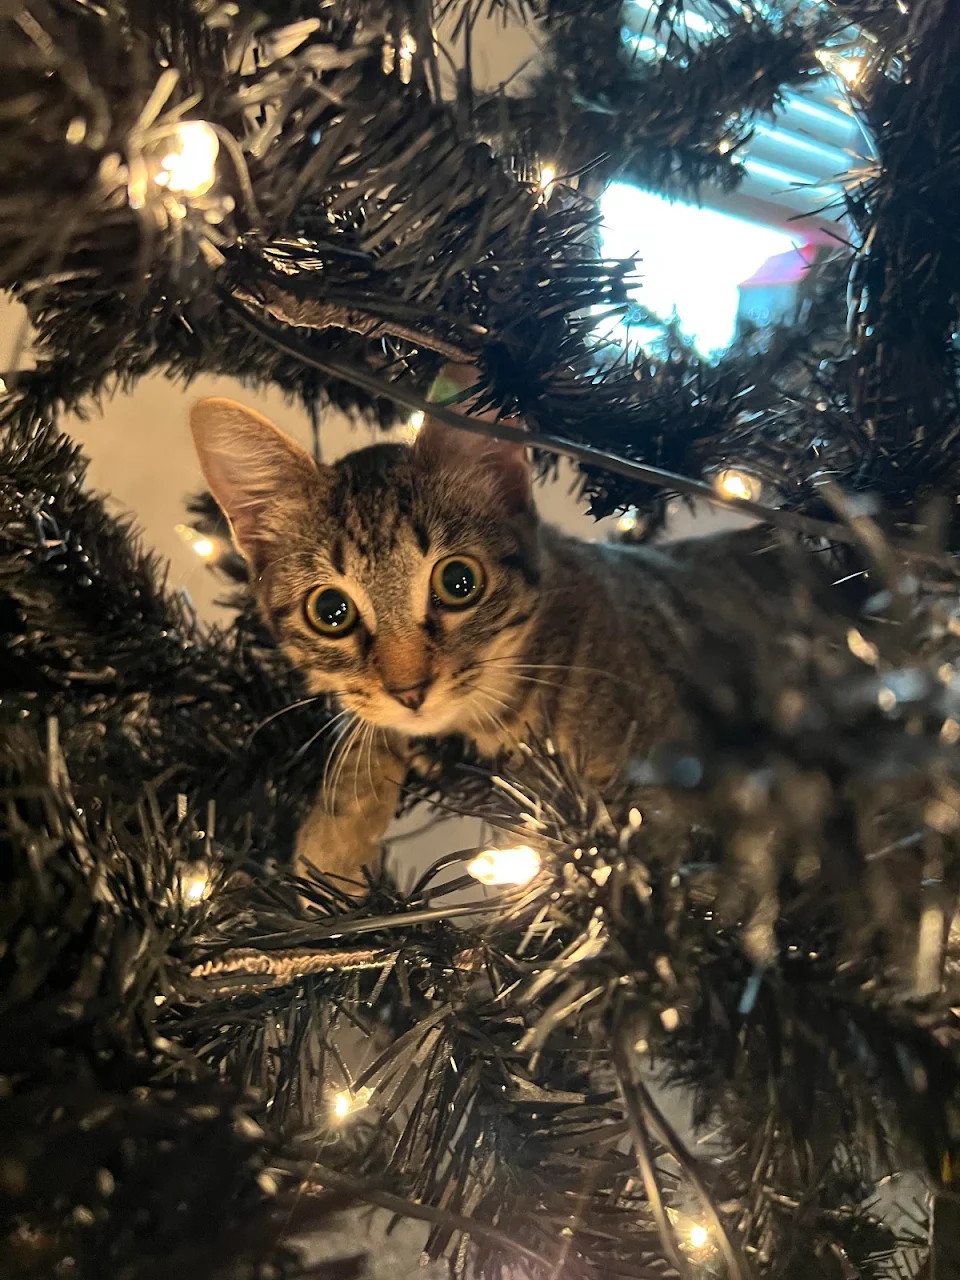 We’re packing and moving and tested out our Christmas tree before packing and my kitten decided to have an adventure and snapped this❤️